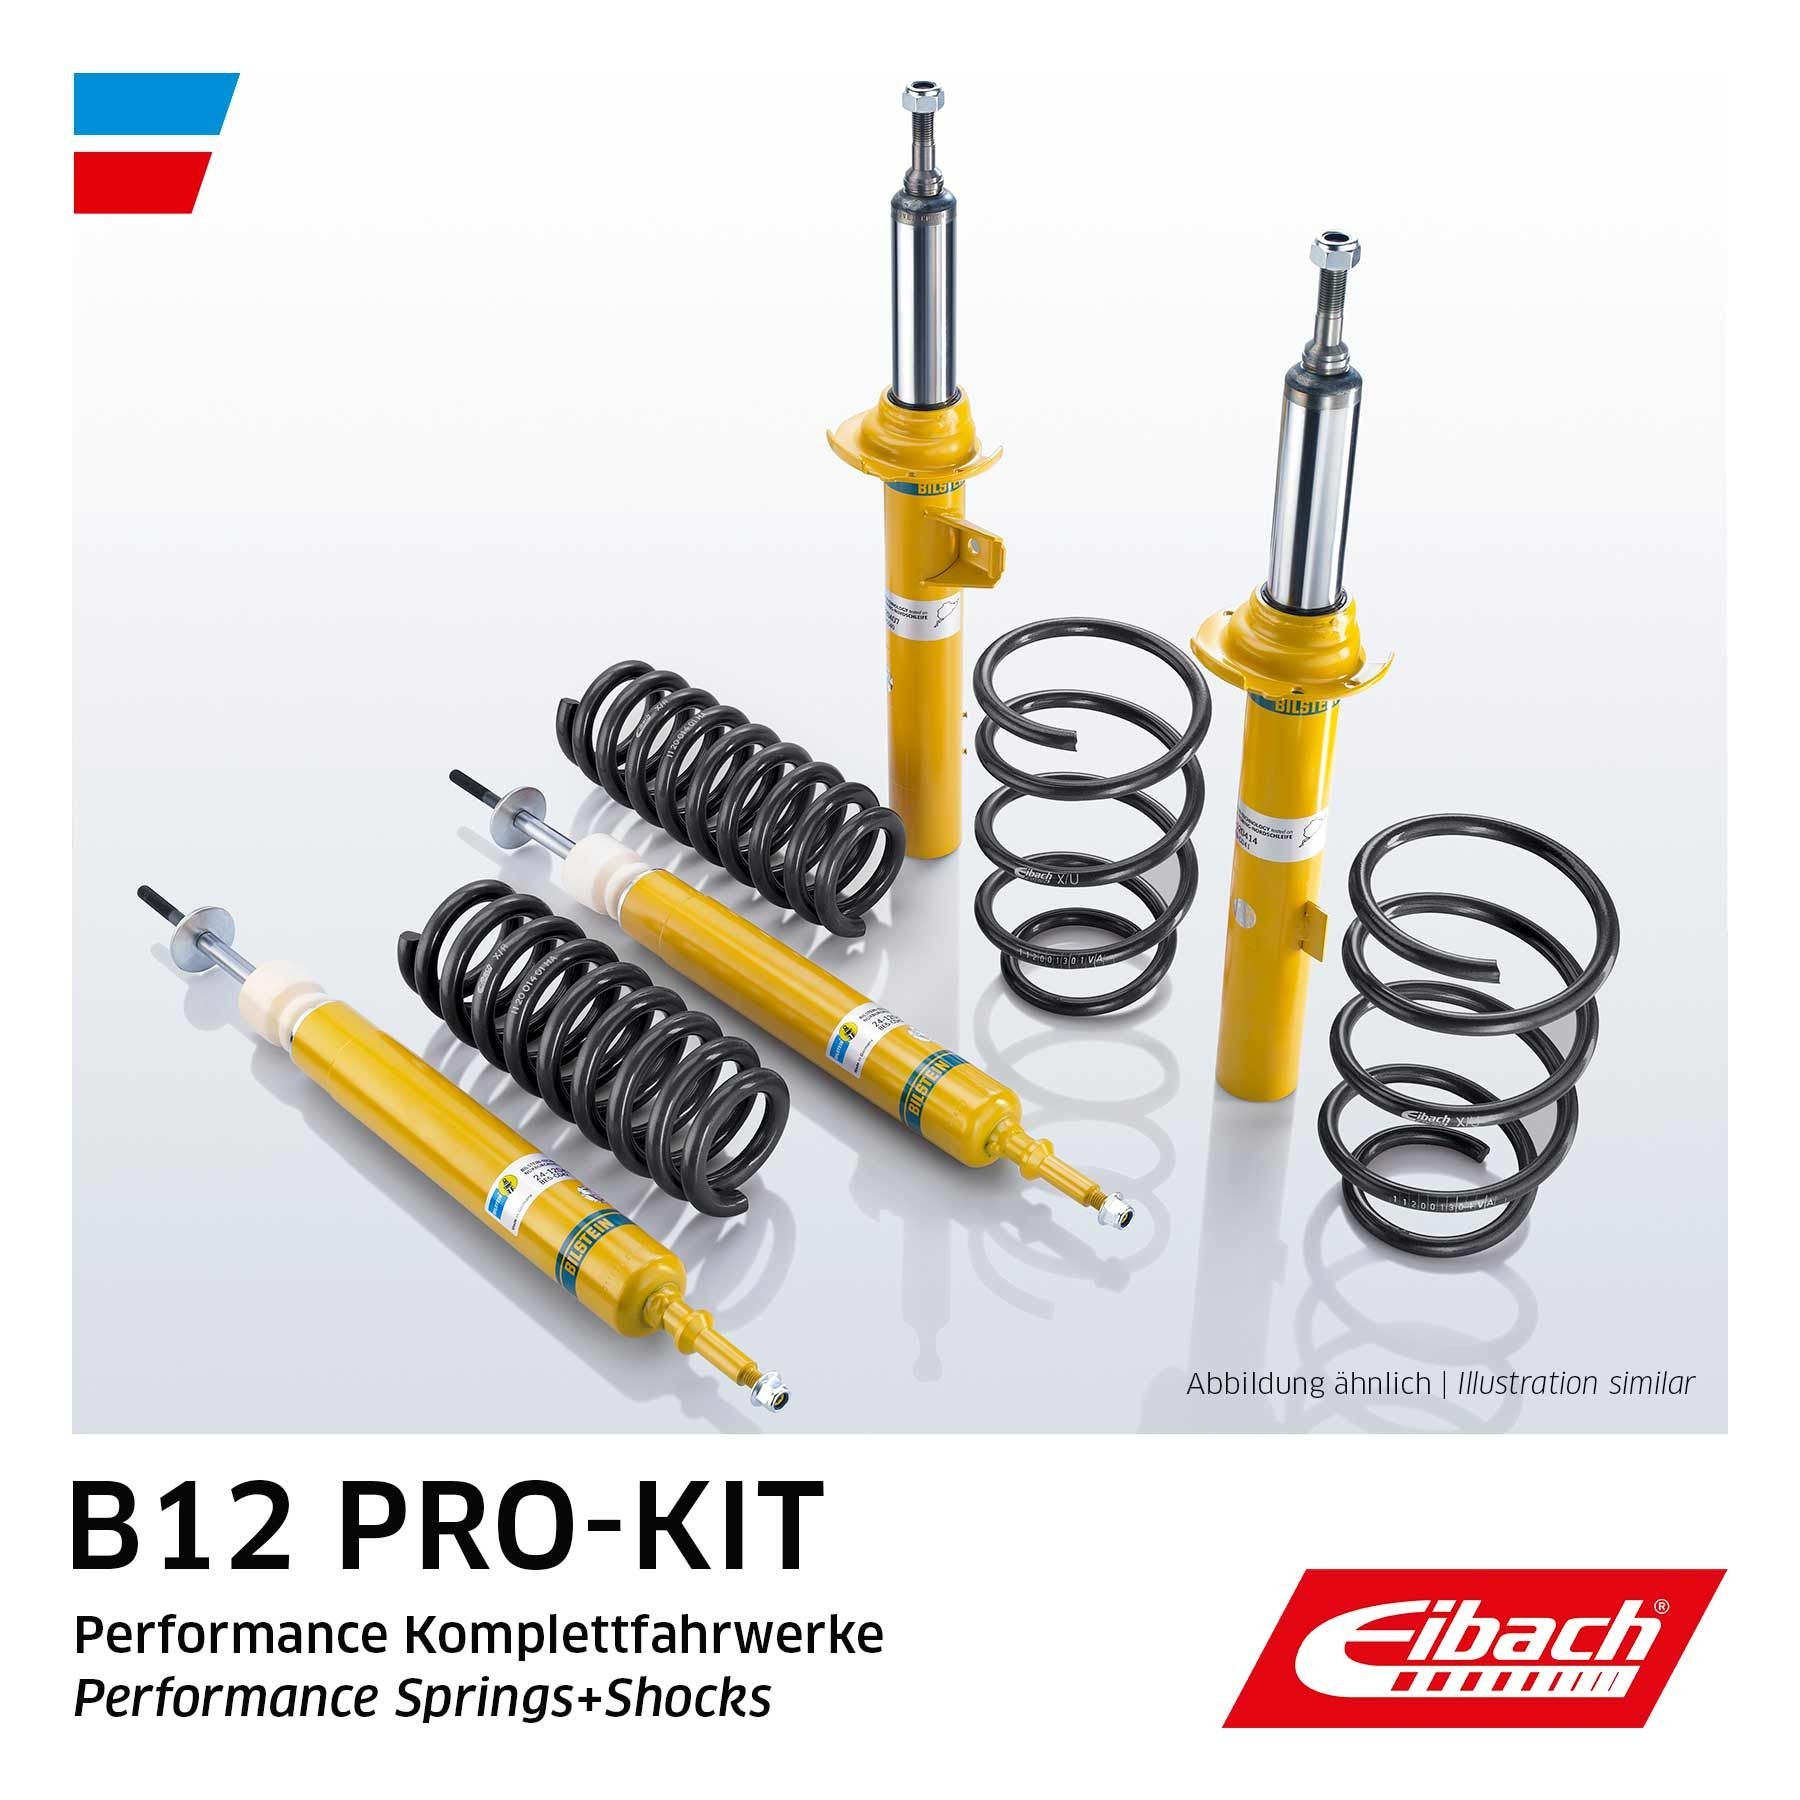 EIBACH Suspension kit, coil springs / shock absorbers Golf 3 Estate new E90-79-012-04-22